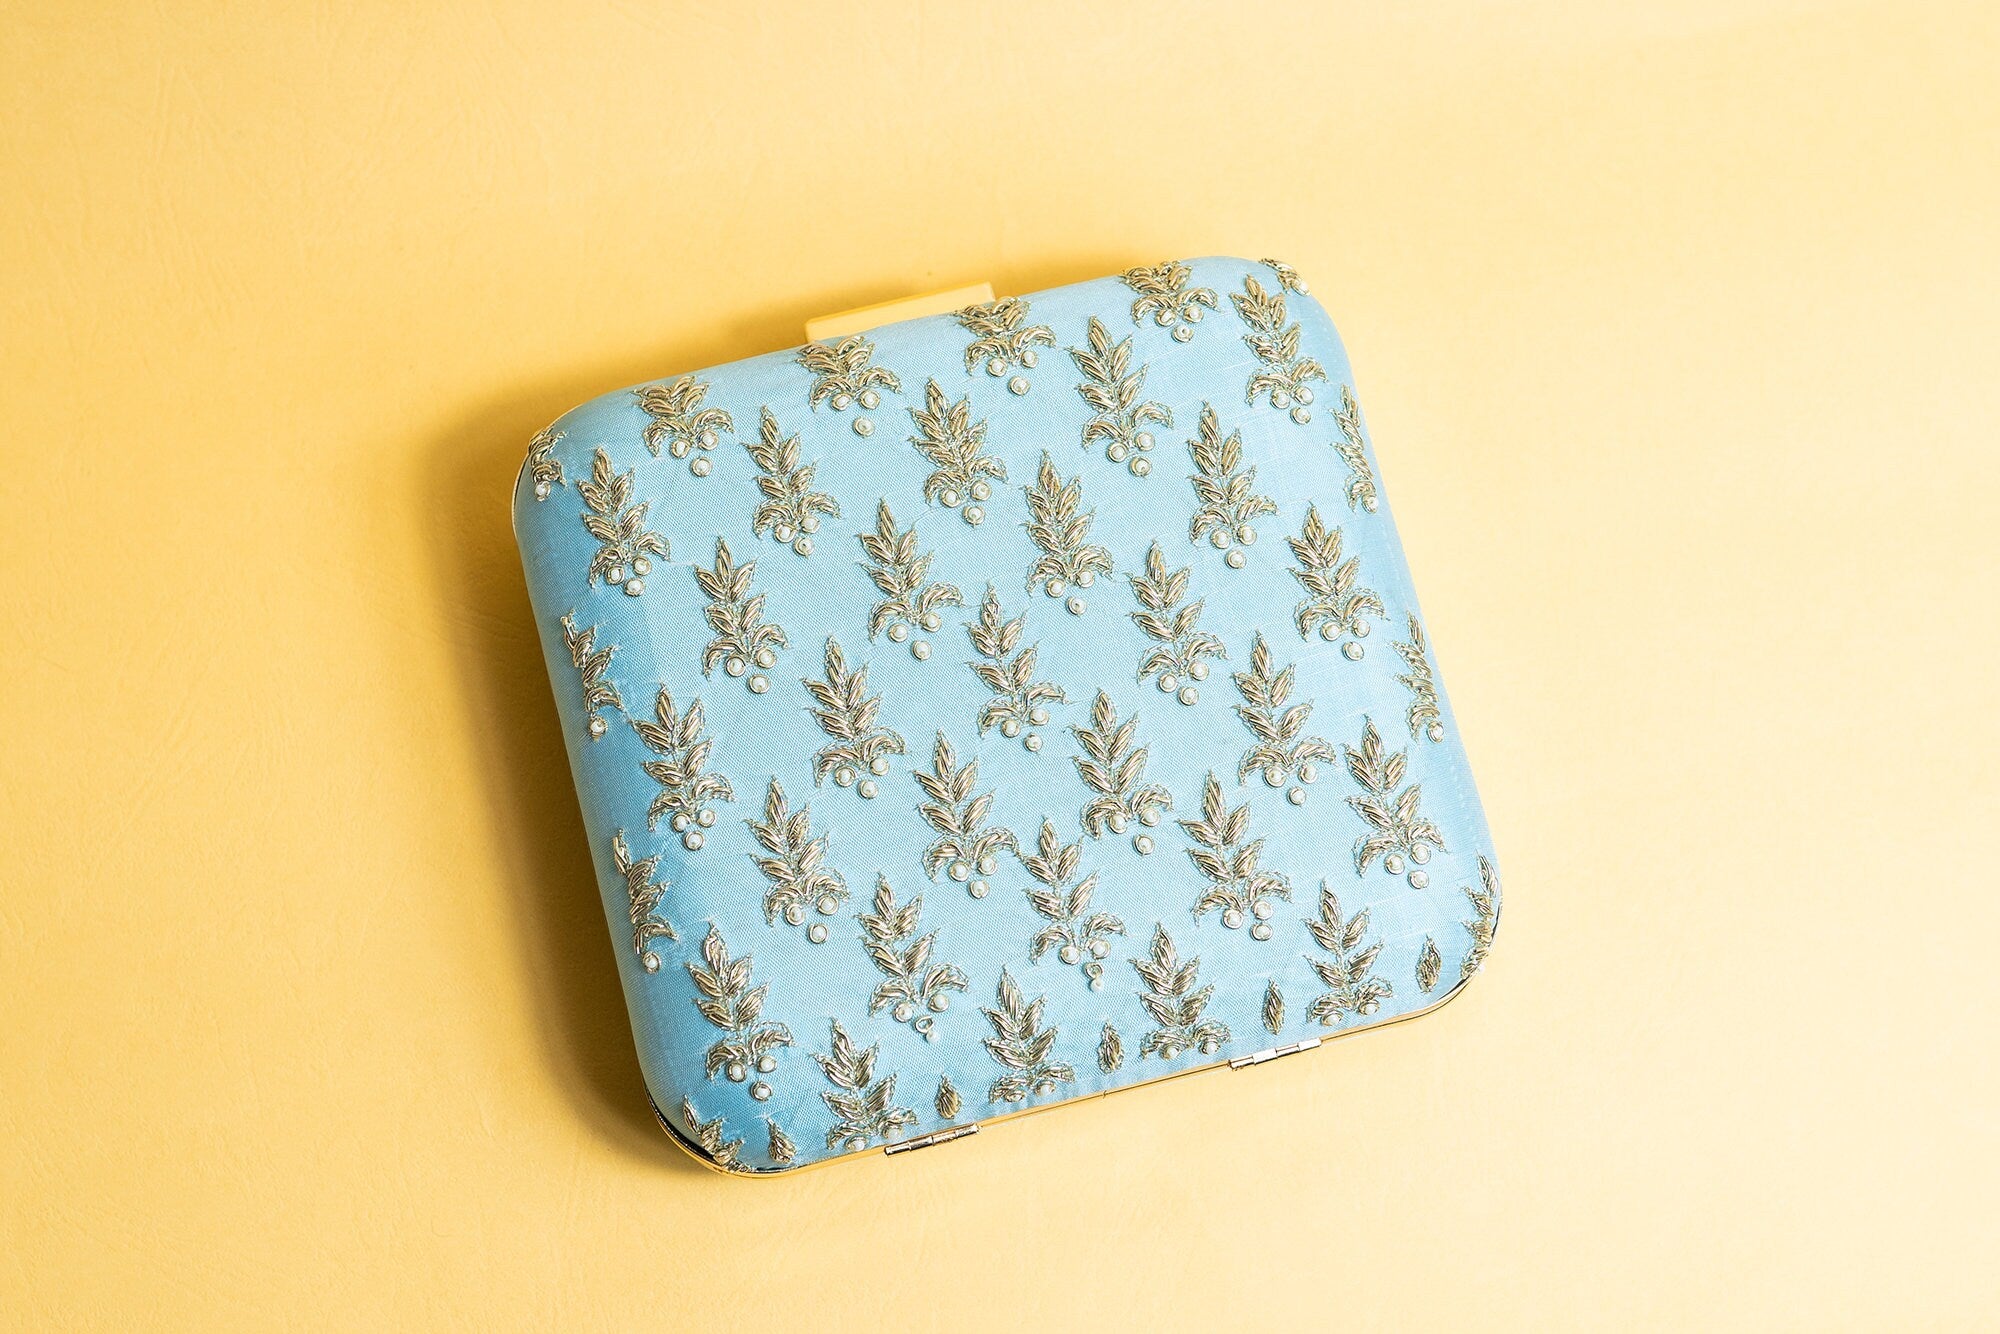 Light Blue square silk clutch purse/bag, hand made embroidery clutch bag with detachable metal sling, perfect gift for her